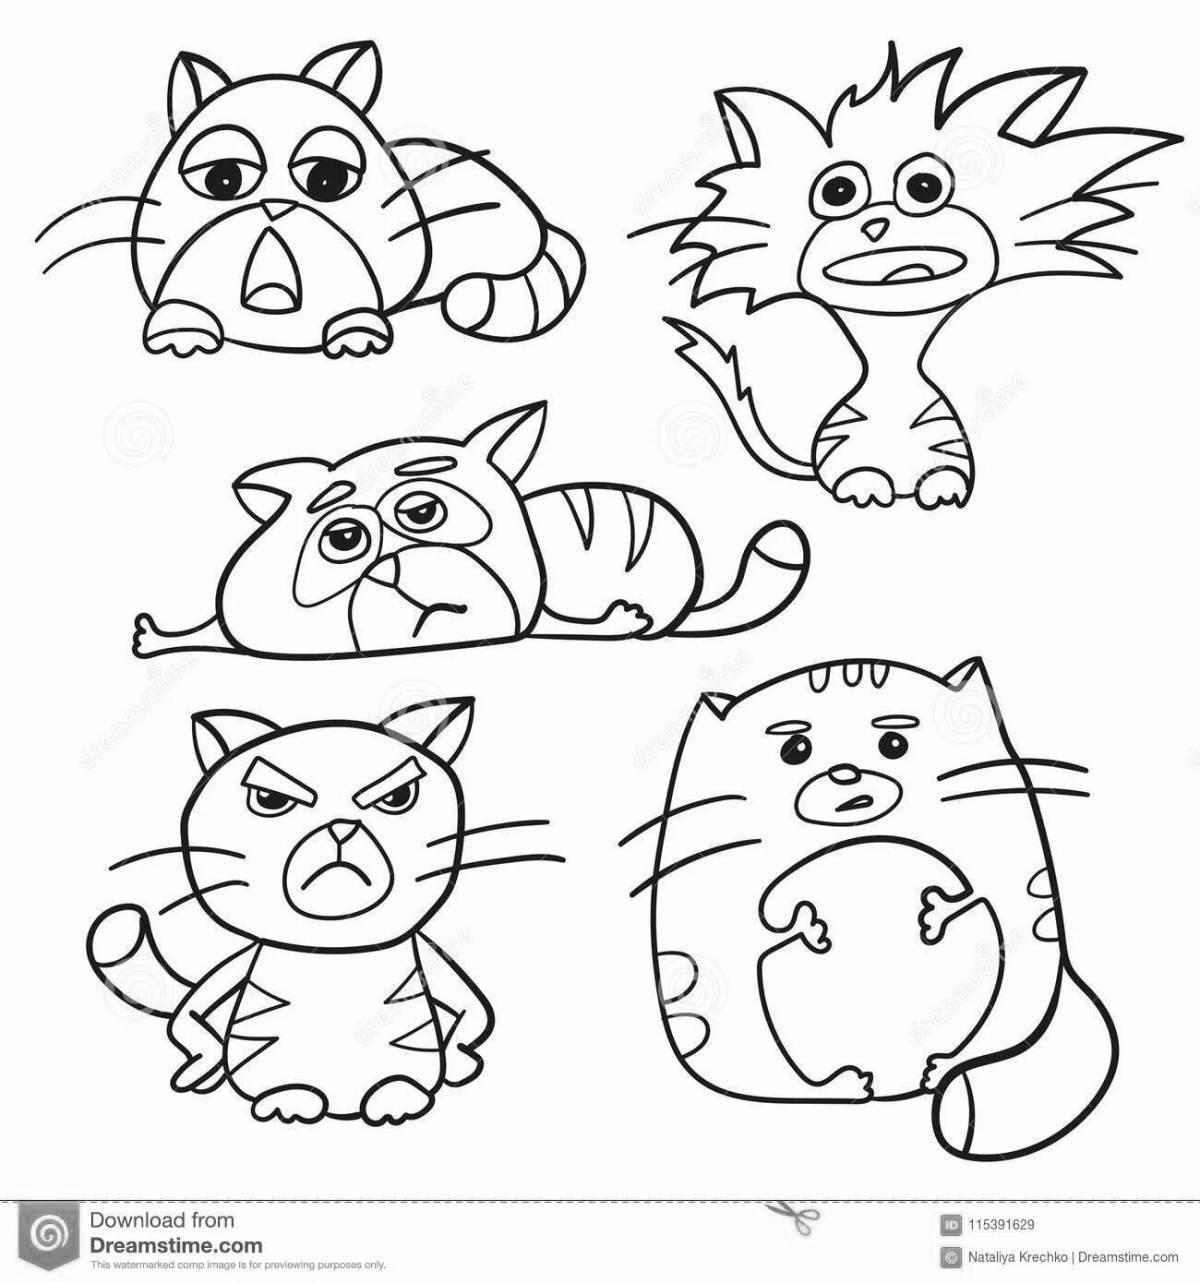 Naughty kittens coloring book